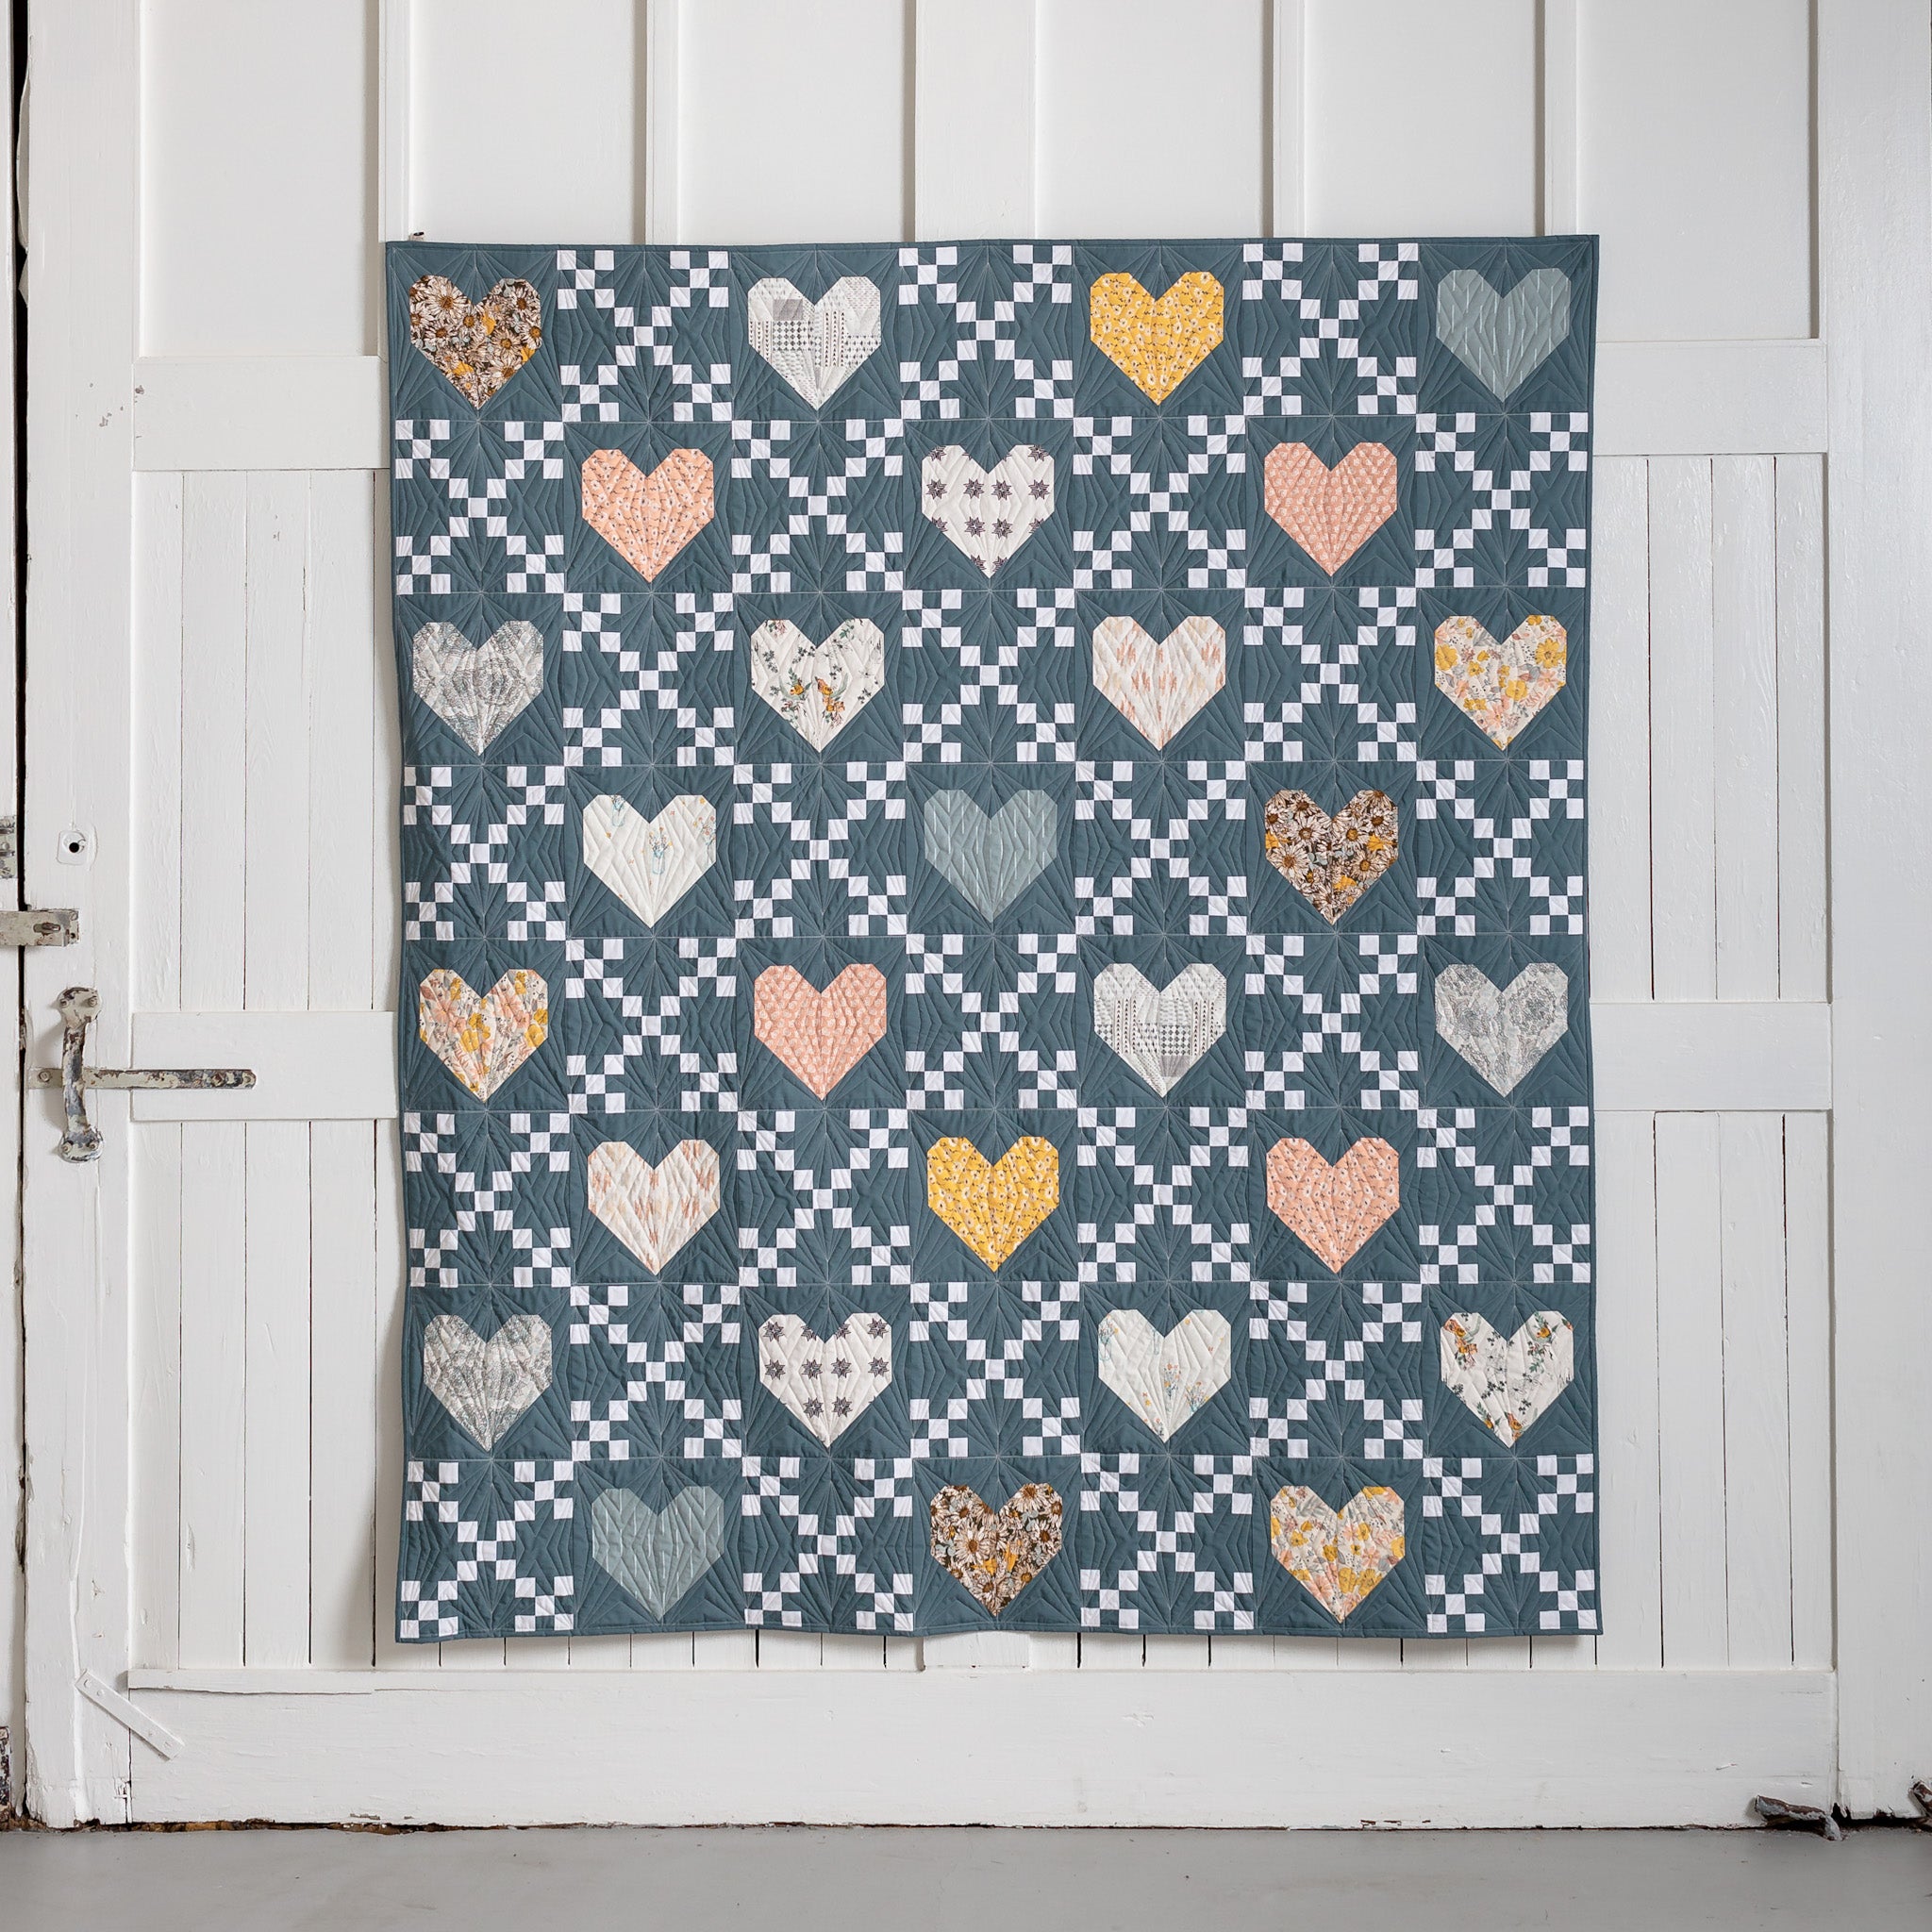 Heirloom Hearts Quilt - using the "Shine On" Collection